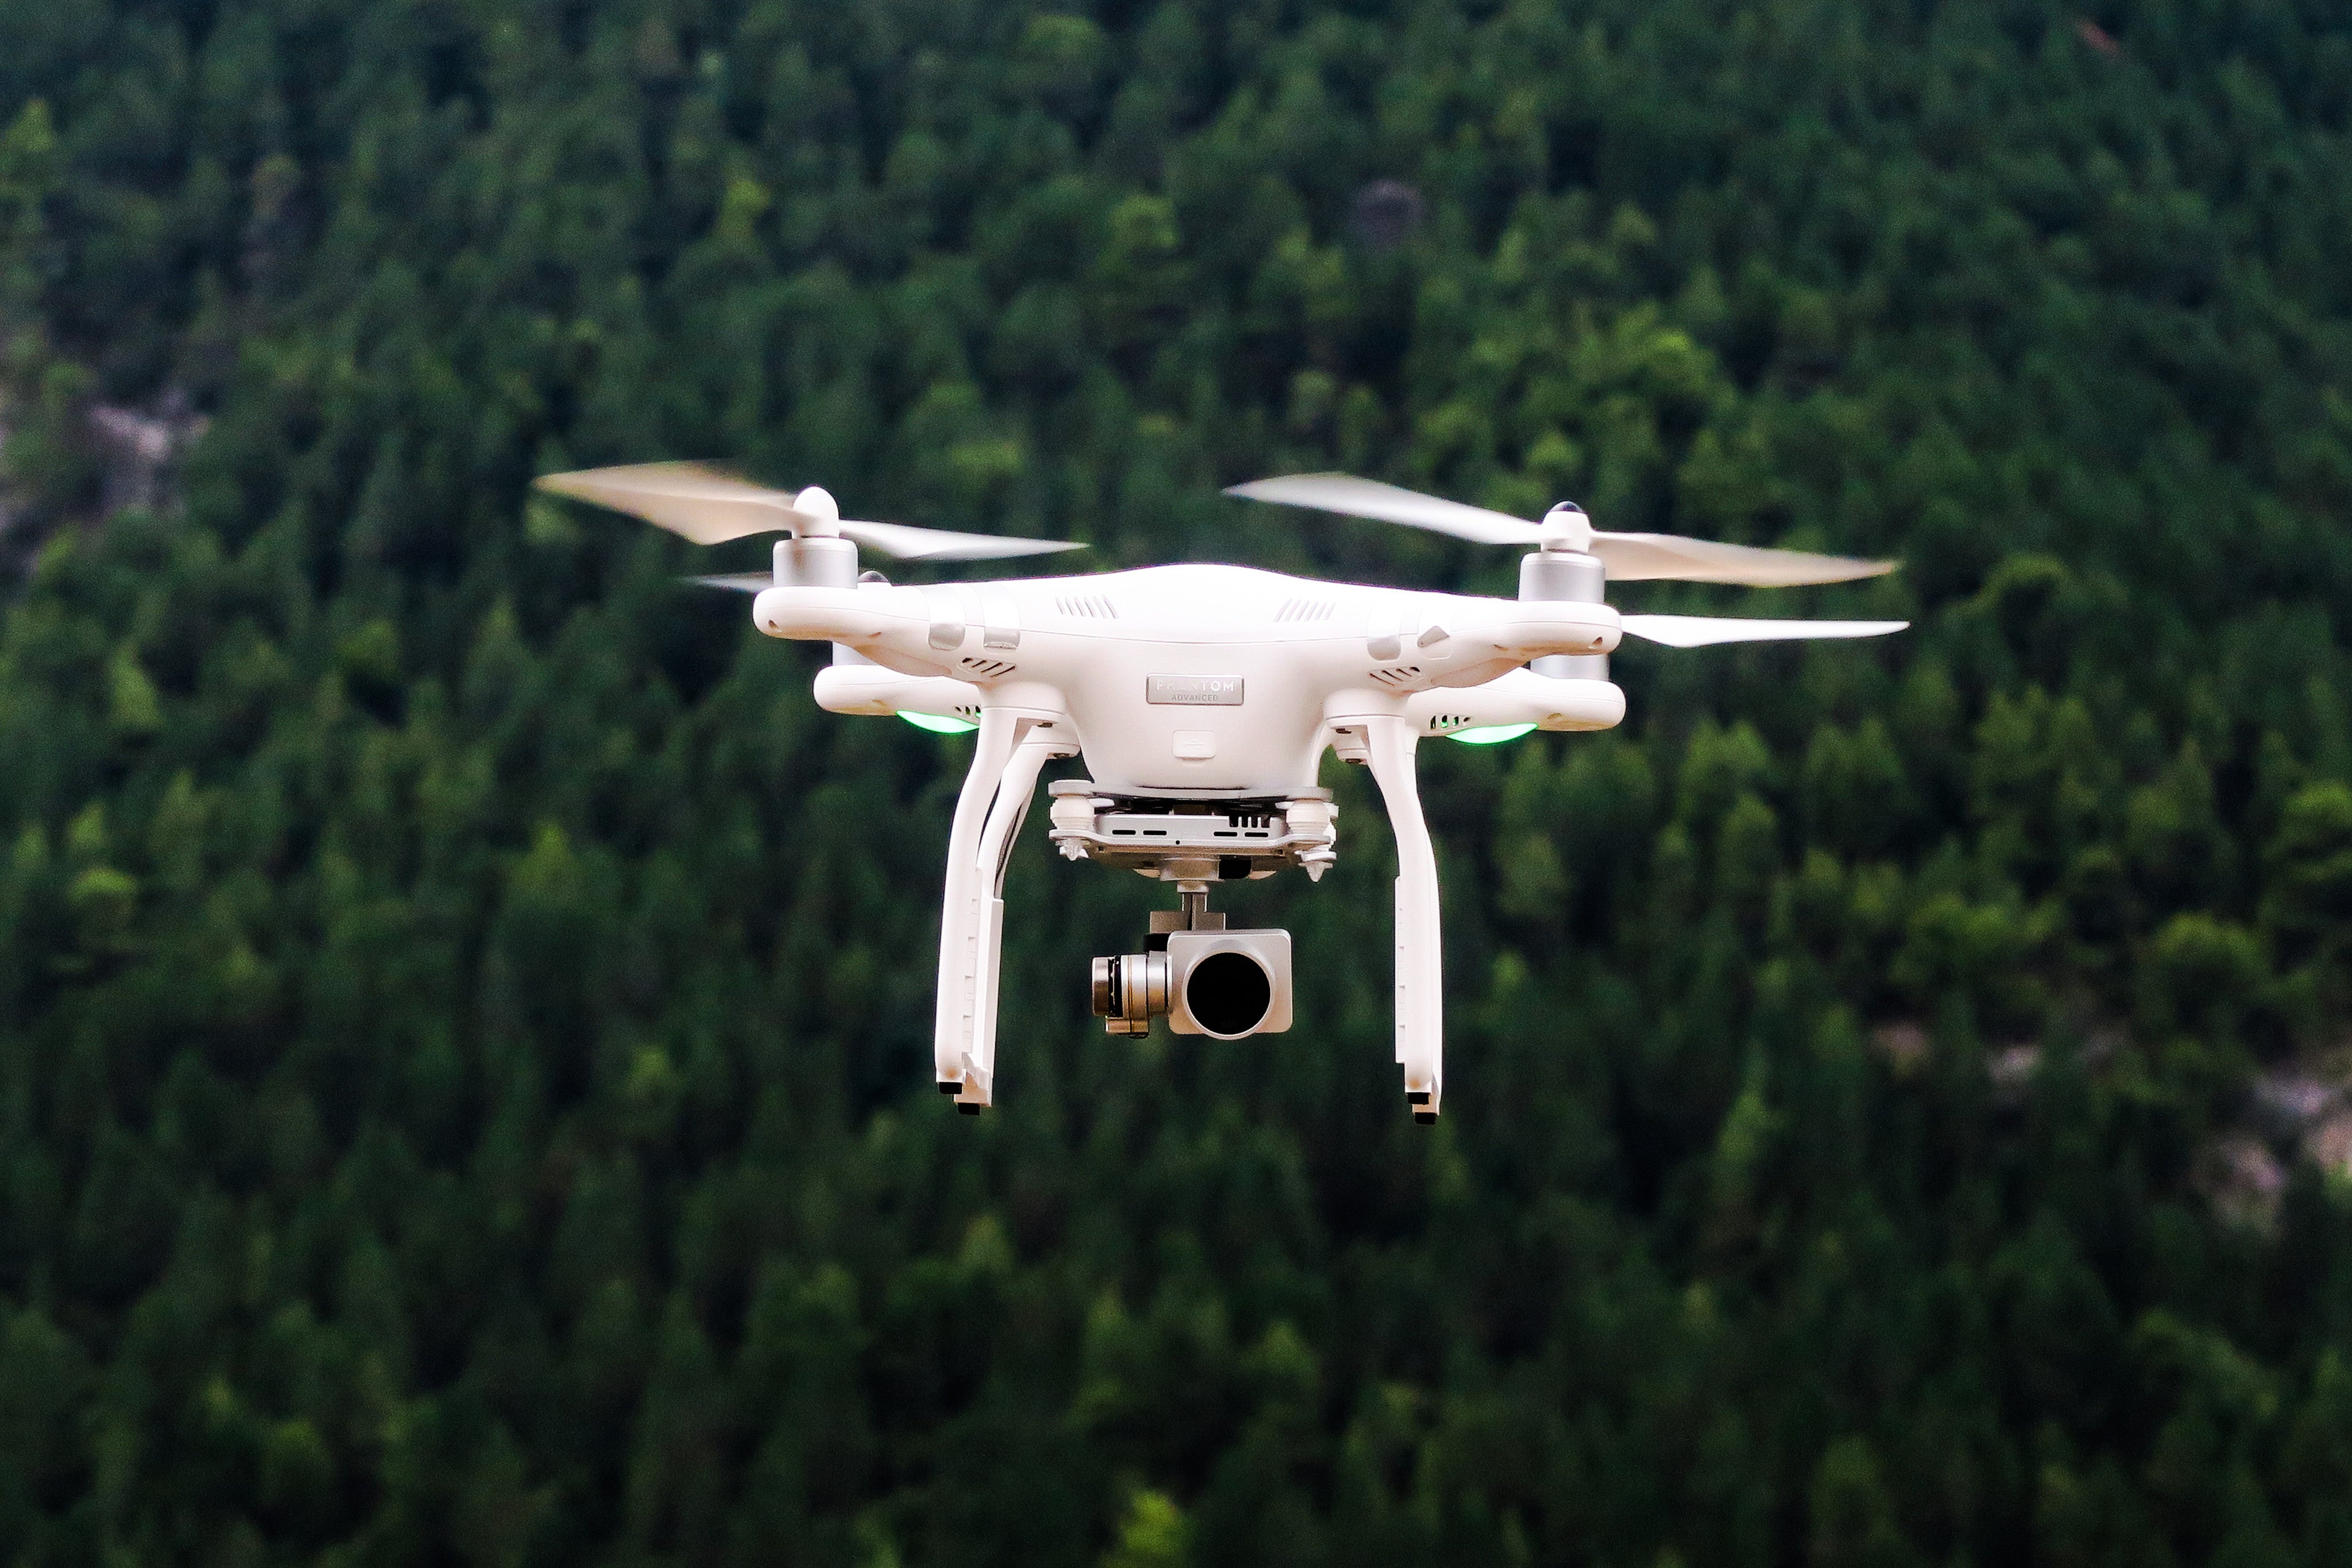 Flying a drone for the first time? Here are 15 tips & tricks for beginners